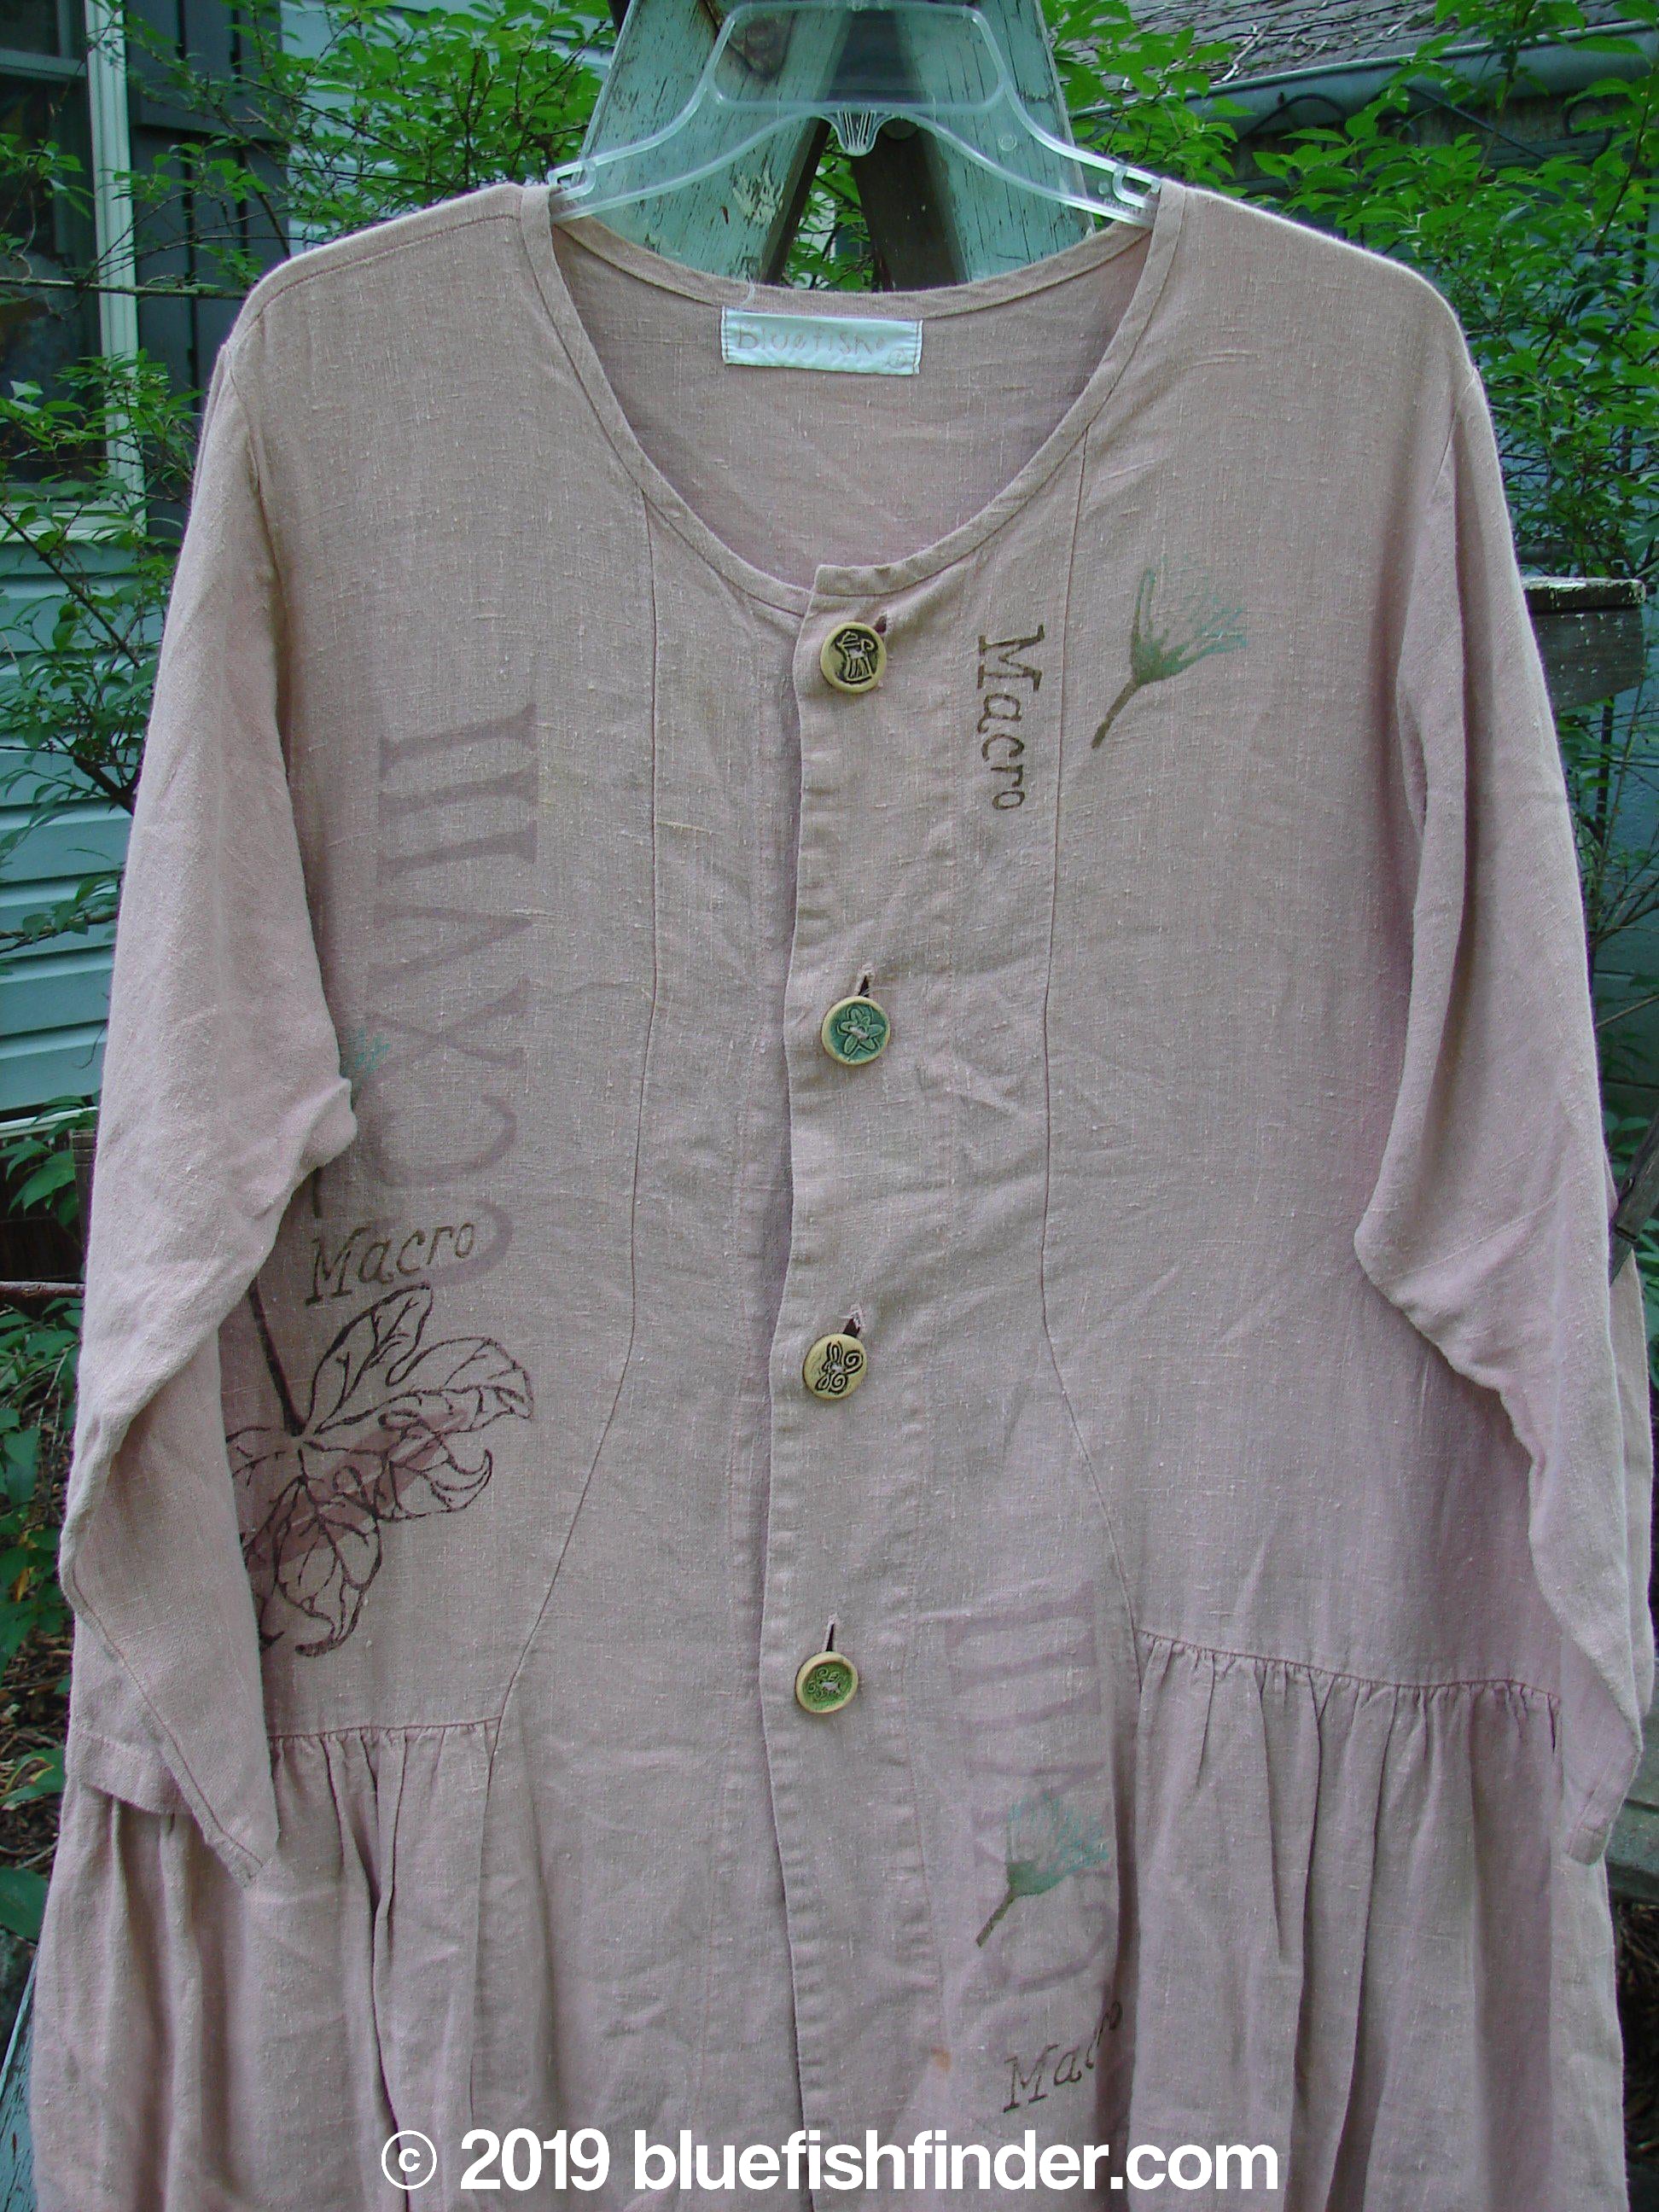 1998 Botanicals Meadow Jacket Macro Mallow Size 1: A pink shirt with buttons featuring a botanical theme, including a leaf and flower.